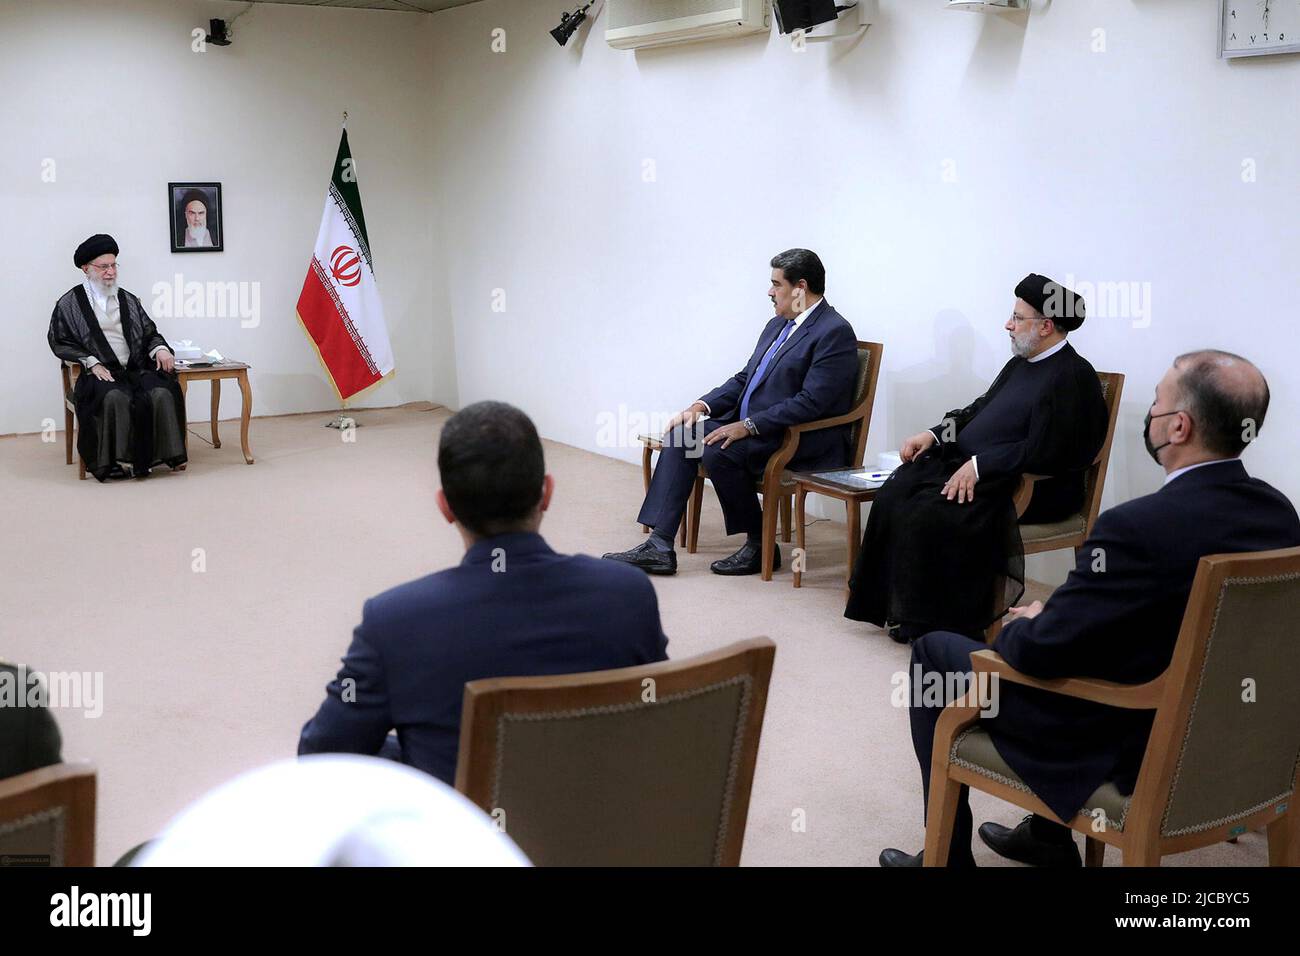 June 11, 2022, Tehran, Tehran, Iran: A handout photo made available by the Iranian supreme leader's office shows Iranian supreme leader Ayatollah ALI KHAMENEI (L) talks to Iranian president EBRAHIM RAISI (R) and Venezuelan President NICOLAS MADURO (C) during a meeting in Tehran, Iran, 11 June 2022. Alongside the likes of Russia, China, Cuba, and Turkey, Iran is one of Venezuela's main allies, and like Venezuela, it is subject to tough US sanctions. Iran is the third country that Maduro is visiting this week after trips to Turkey and Algeria. (Credit Image: © Iranian Supreme Leader'S Office via Stock Photo